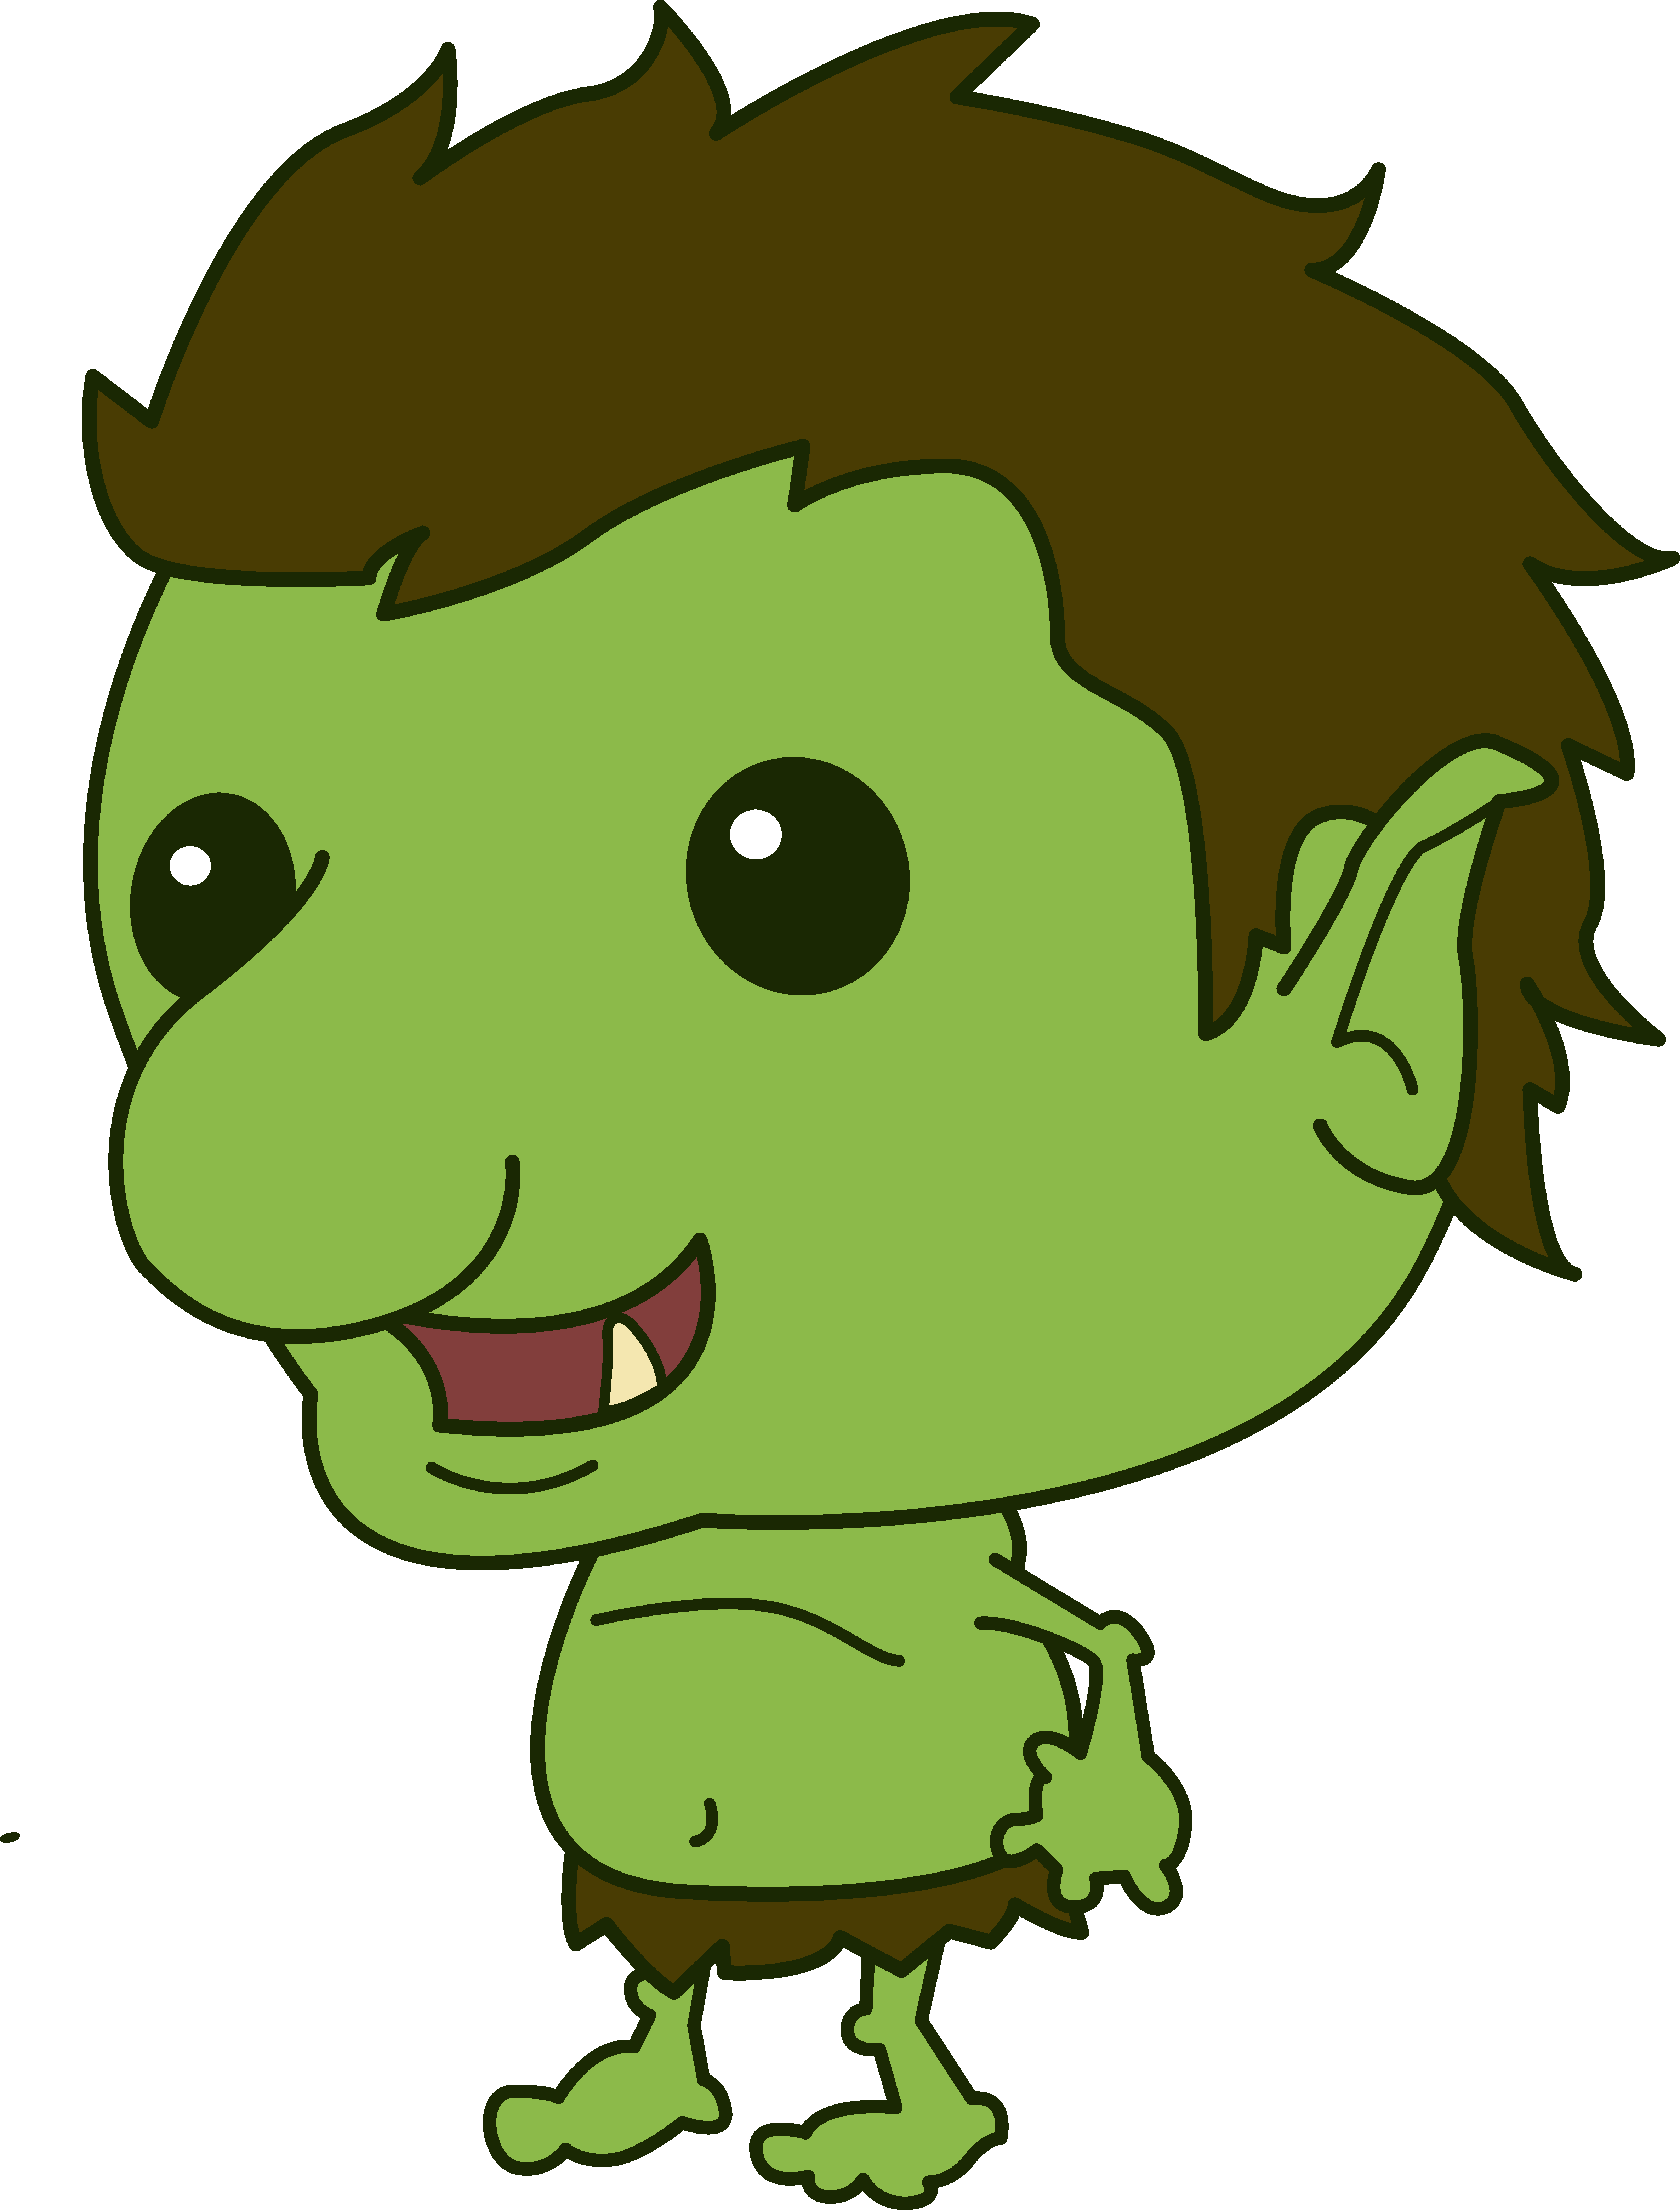 Troll Clipart | Clipart Panda - Free Clipart Images